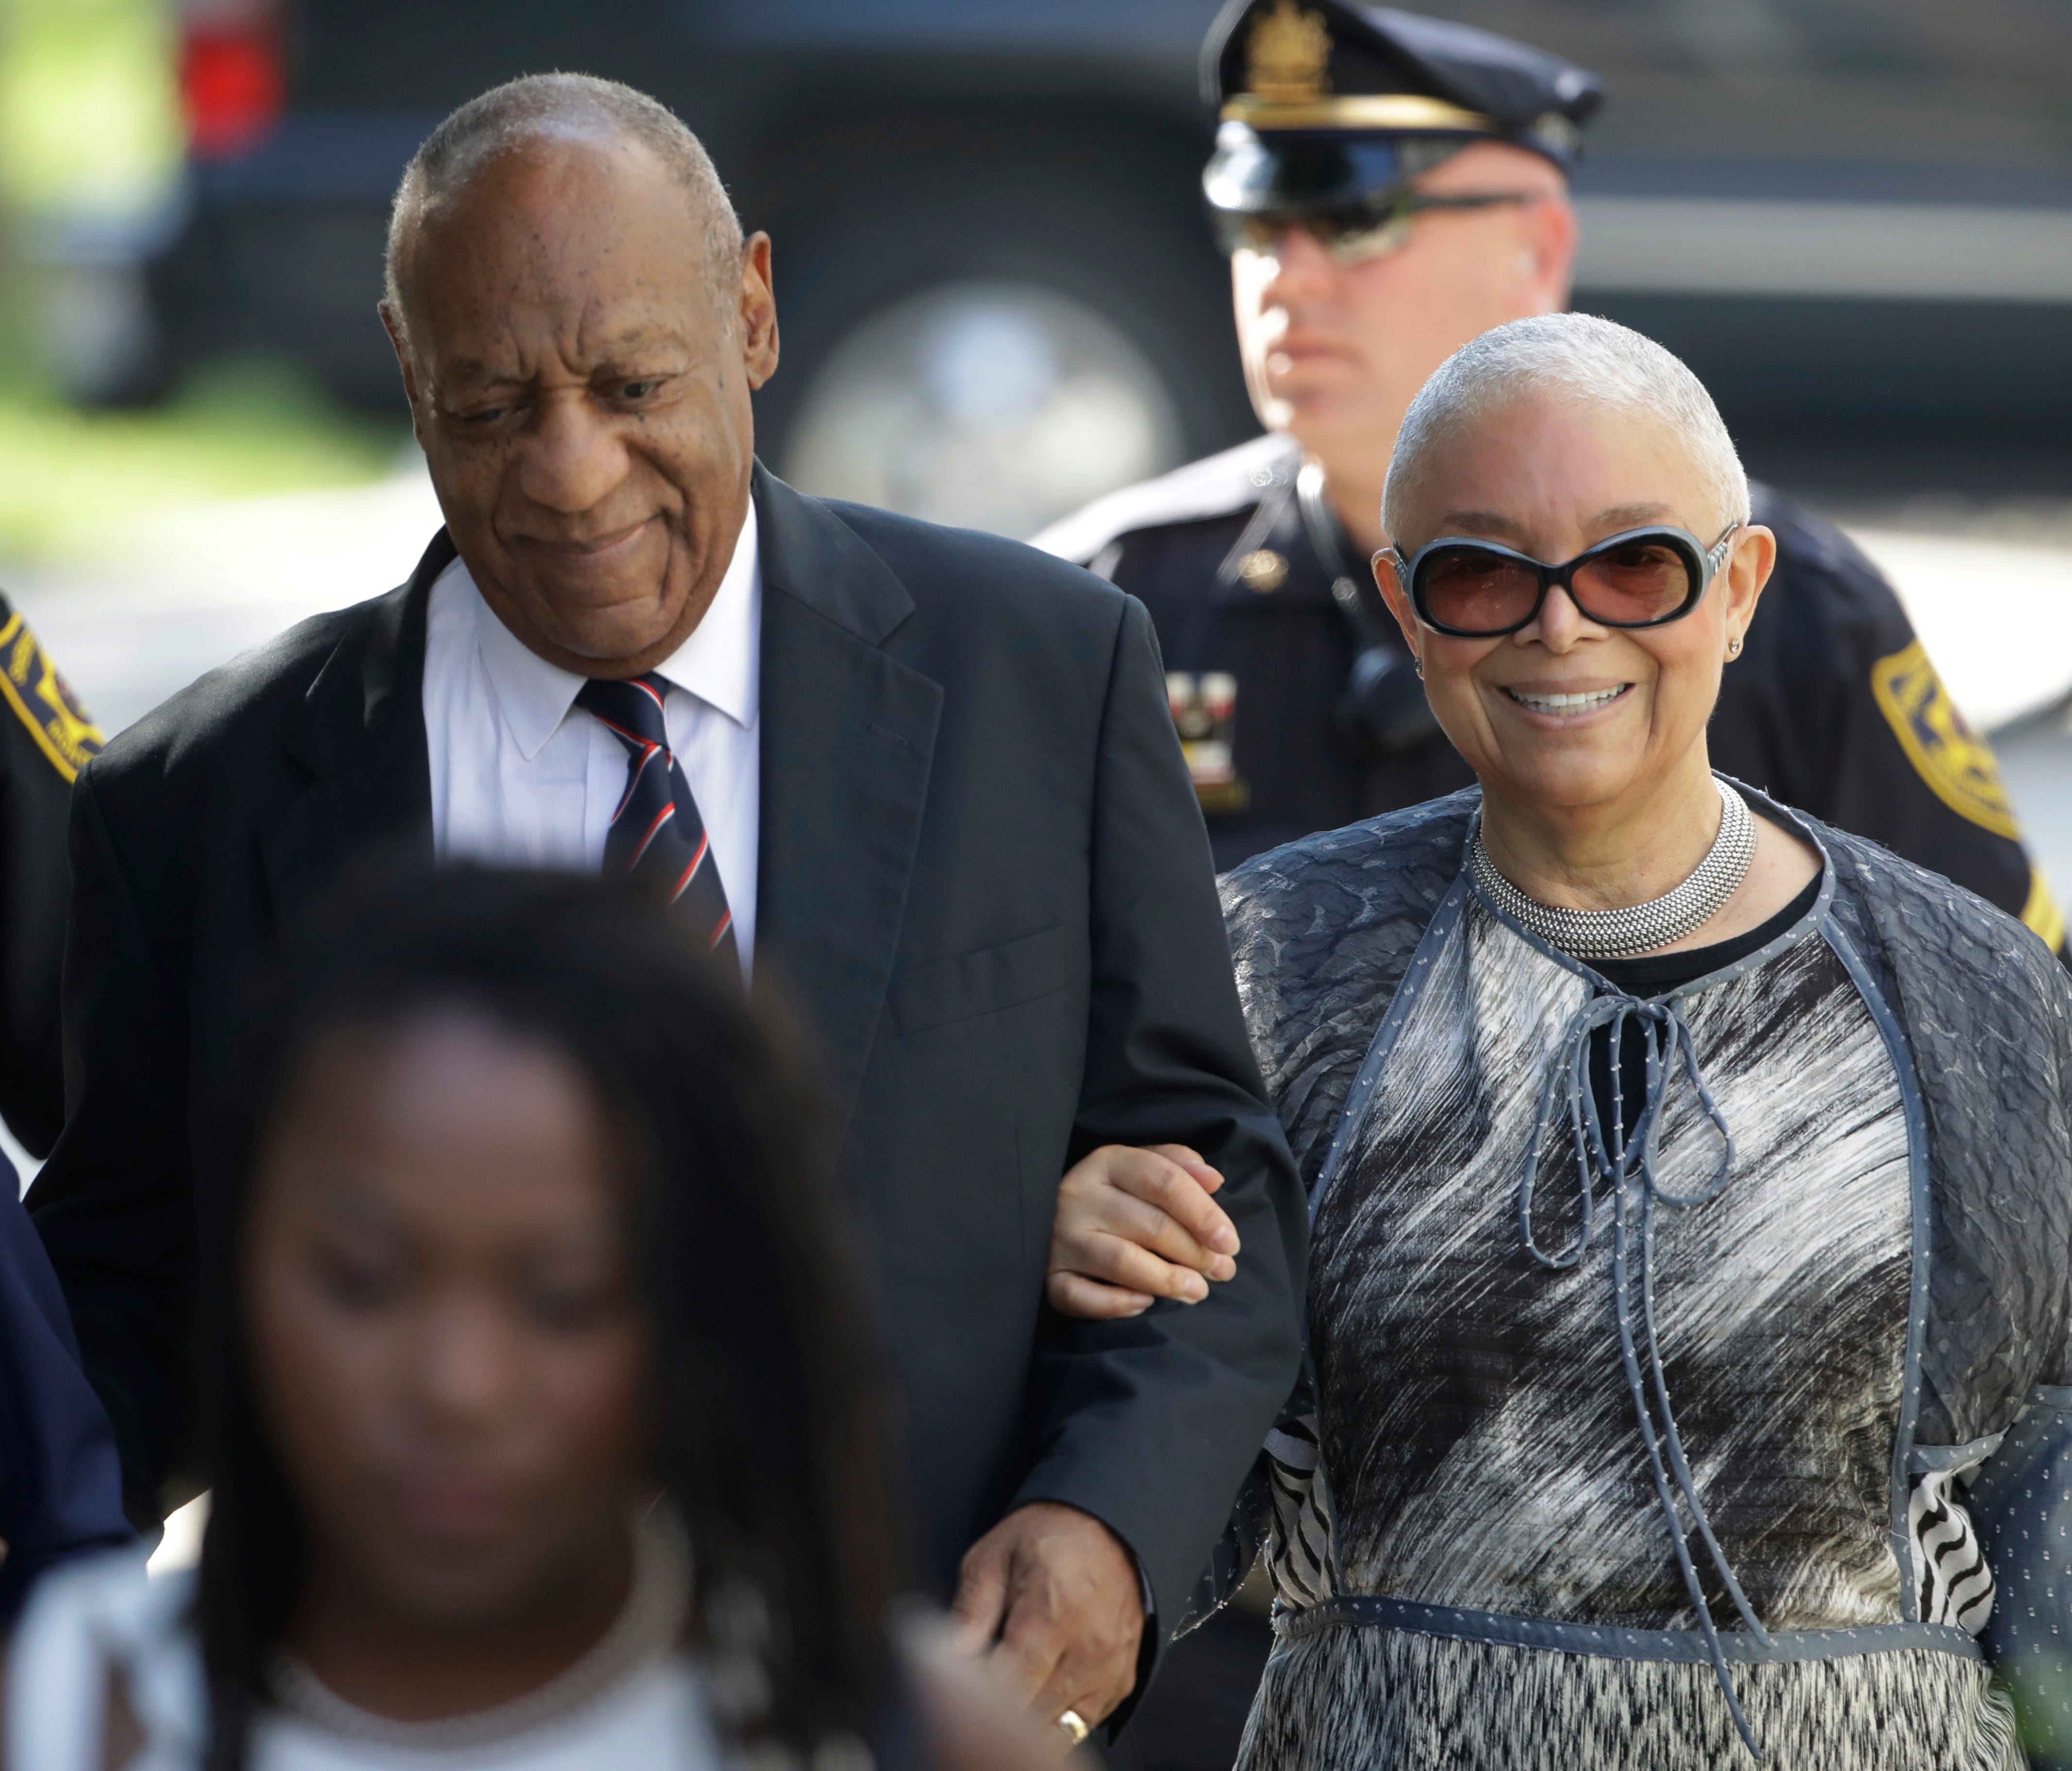 Bill Cosby arrives for his sexual assault trial with his wife Camille Cosby, at the courthouse in Norristown, Pa., June 12, 2017.